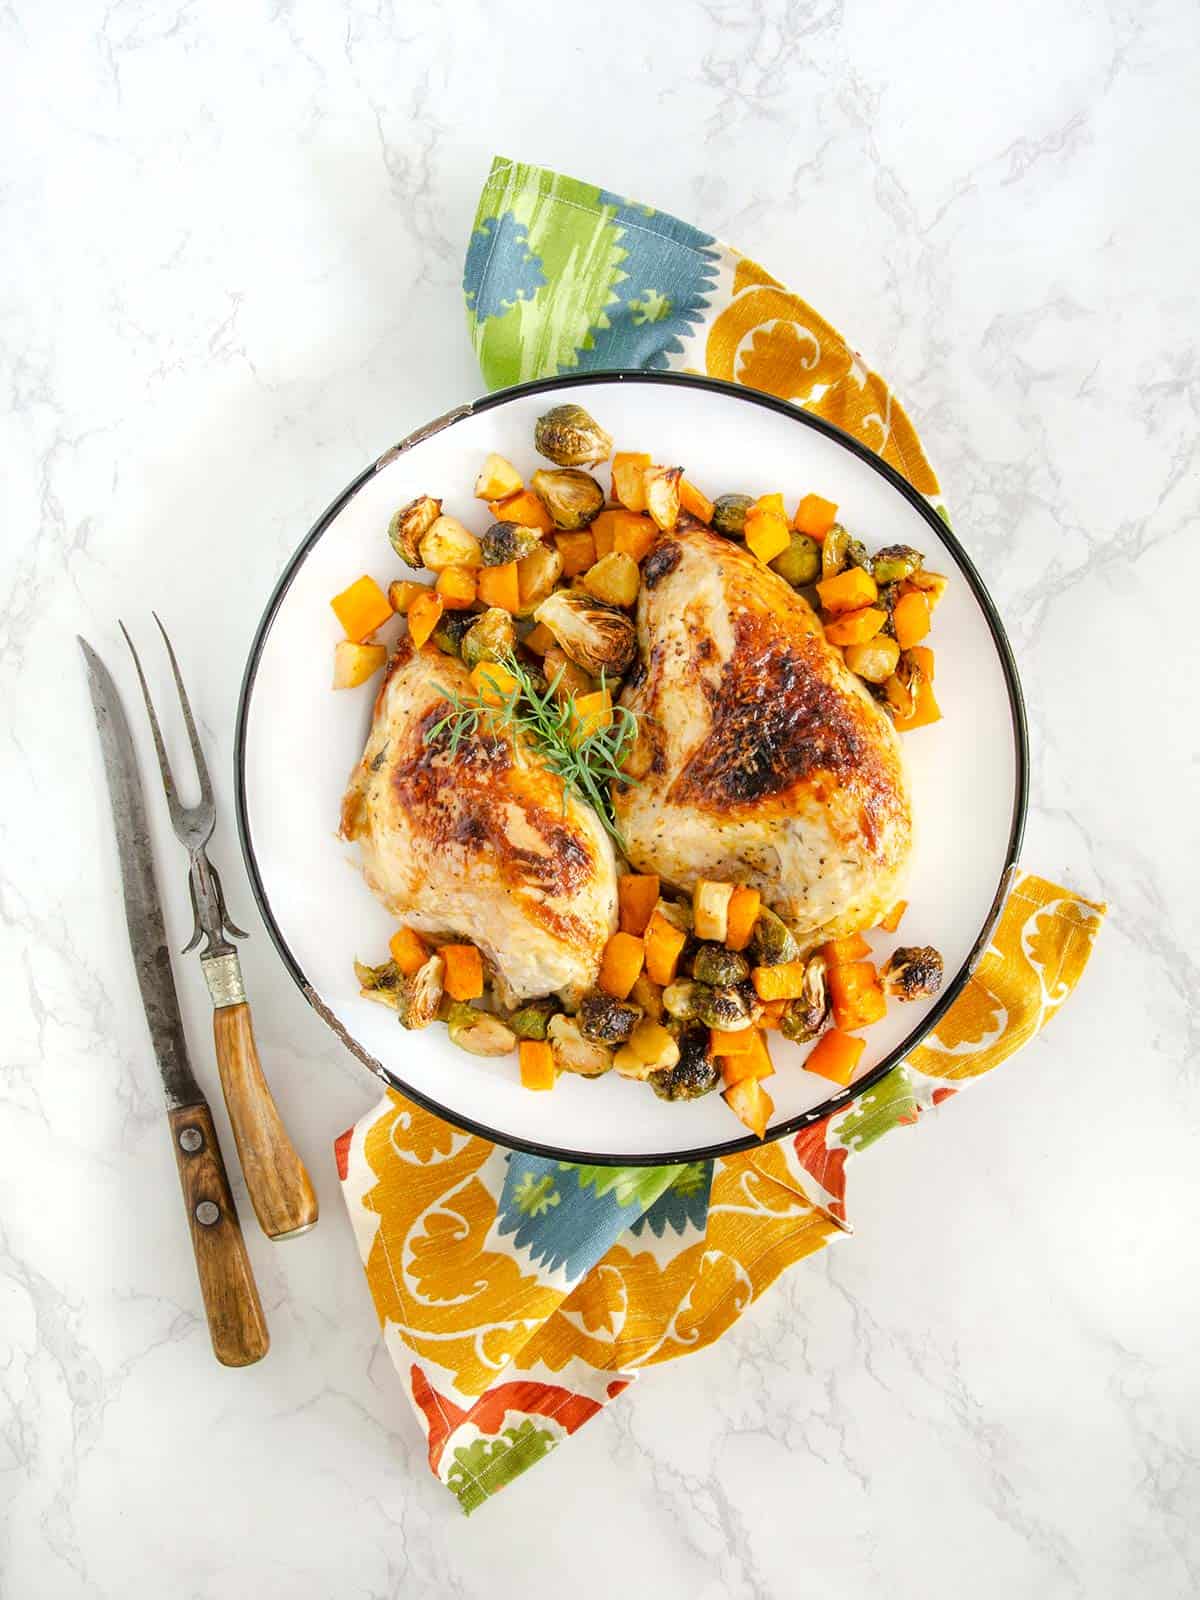 Honey mustard chicken on a plate with veggies next to a decorative napkin and silverware.